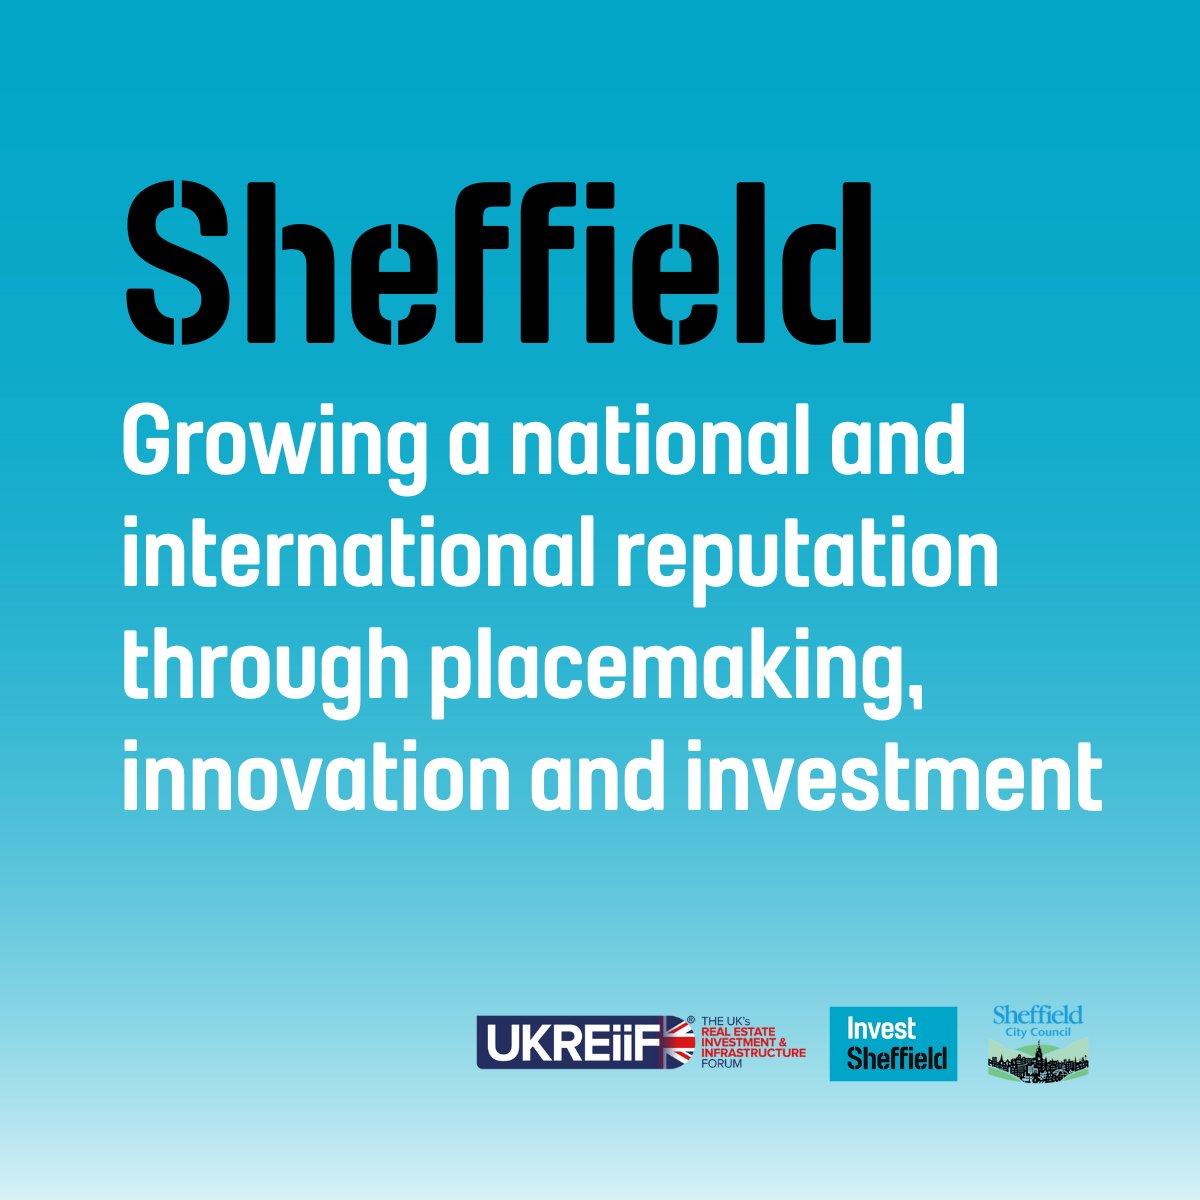 Just under two weeks until the Sheffield Showcase event at @UKREiiF! The panel includes the Chief Executive of @Sheffcouncil, @katejosephs and @Tomhunt100. They will be joined by @HomesEngland, @Landg_group and @OLPSheffield to discuss Sheffield's exciting 2024!